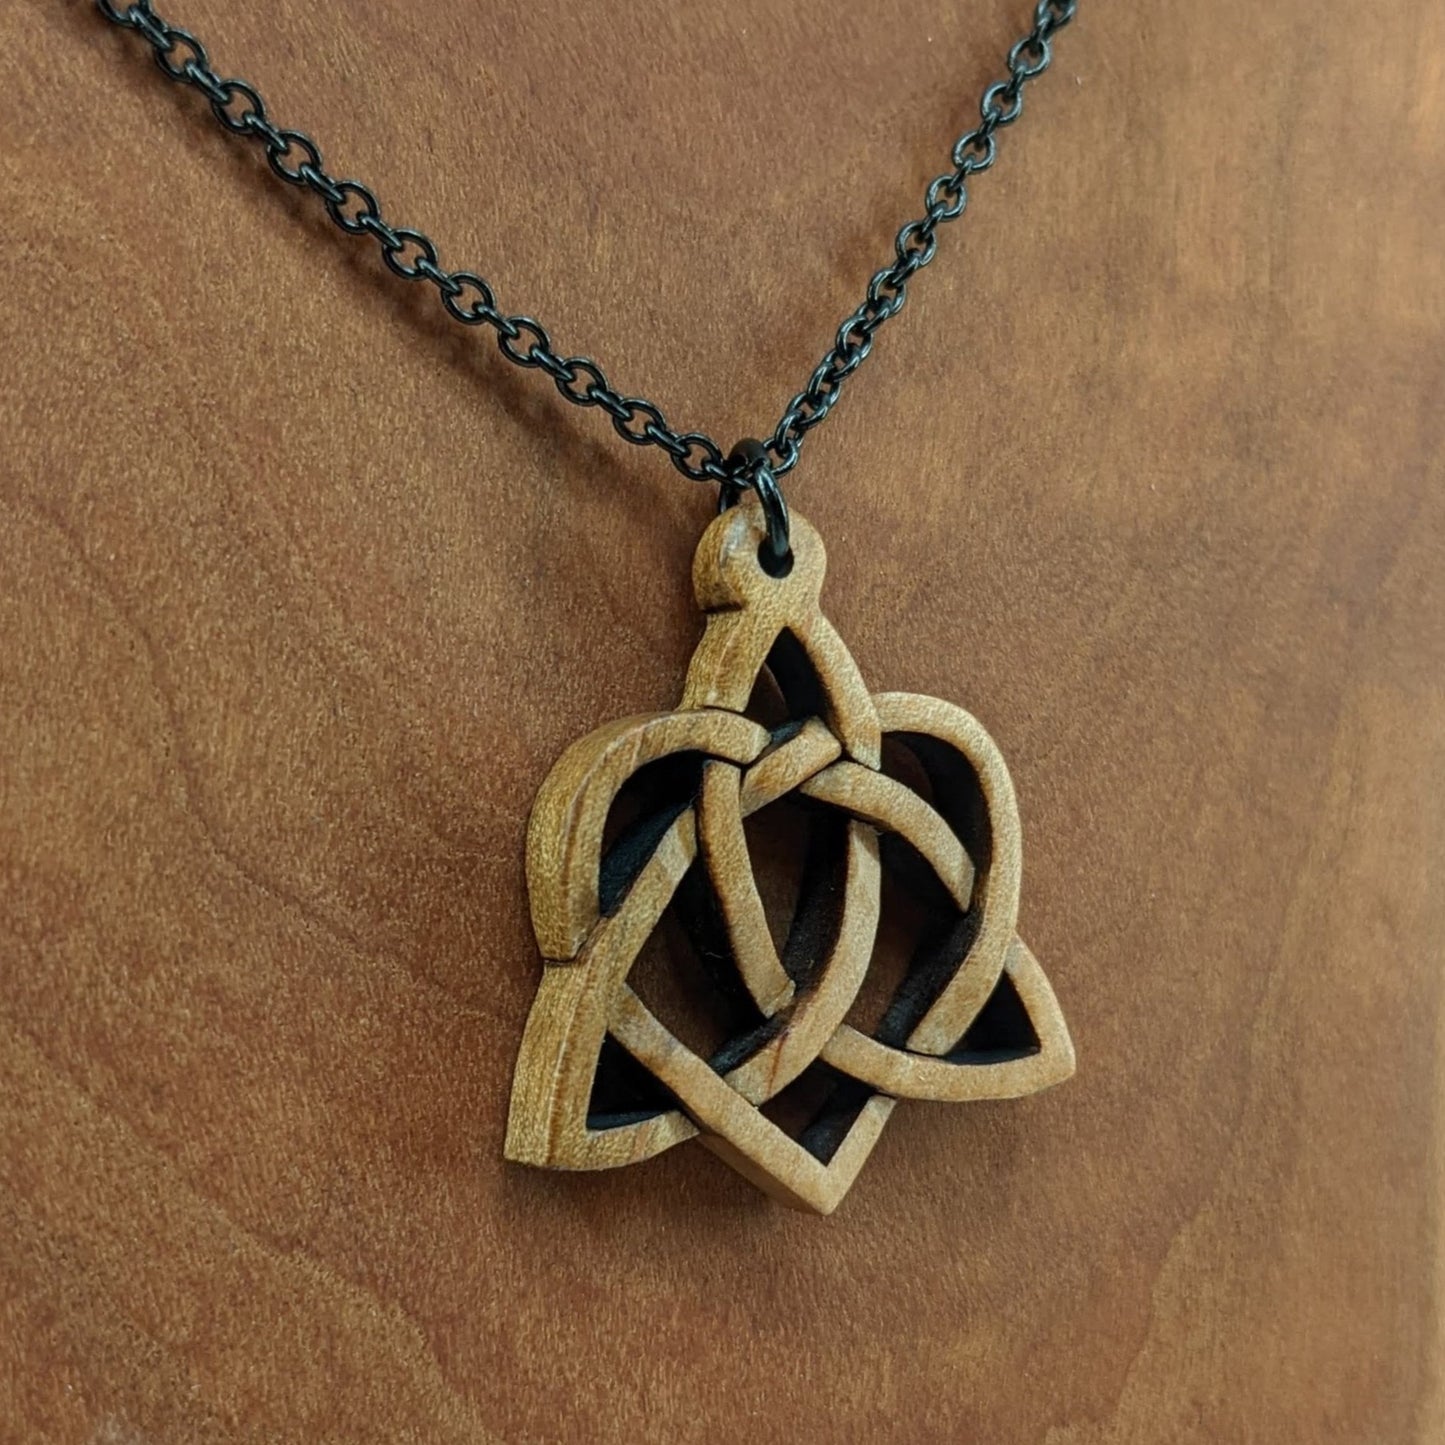 Wooden necklace pendant created in the style of a Celtic weave pattern that is a trinity and heart combined. The symbol represents adoption. Hanging from a black stainless steel chain against a cherry wood background.